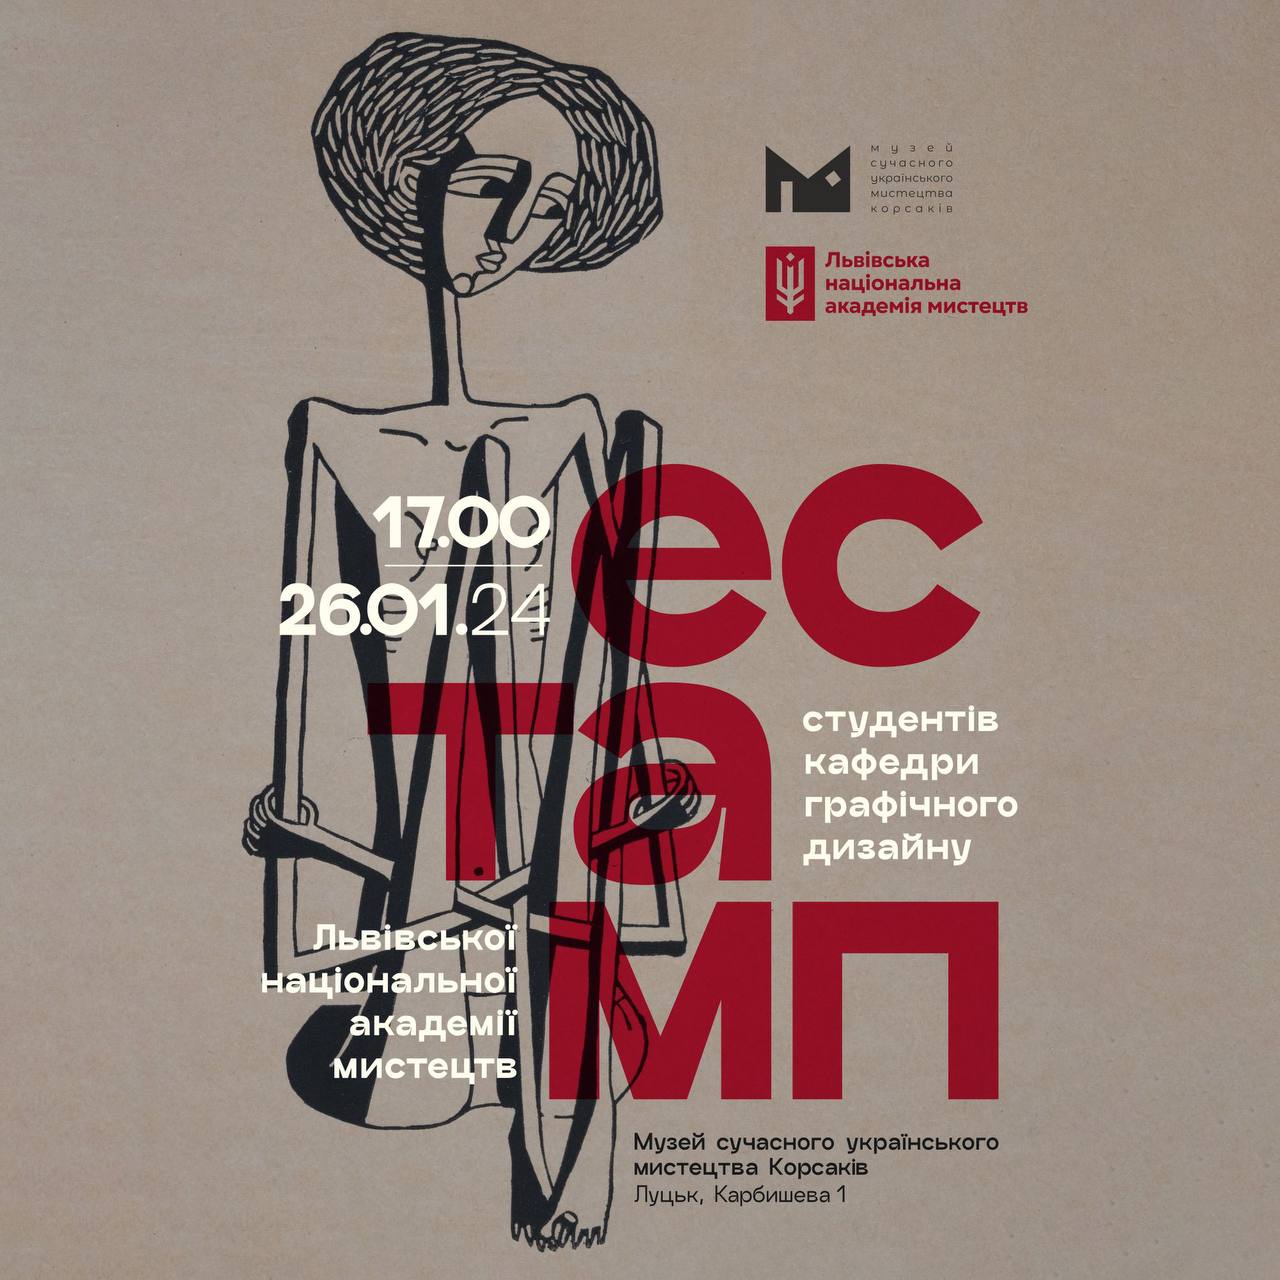 On January 26, at 5:00 p.m., the Korsaks` Museum will host the opening of an exhibition of works by students of the Department of Graphic Design of the Lviv National Academy of Arts “Estamp”